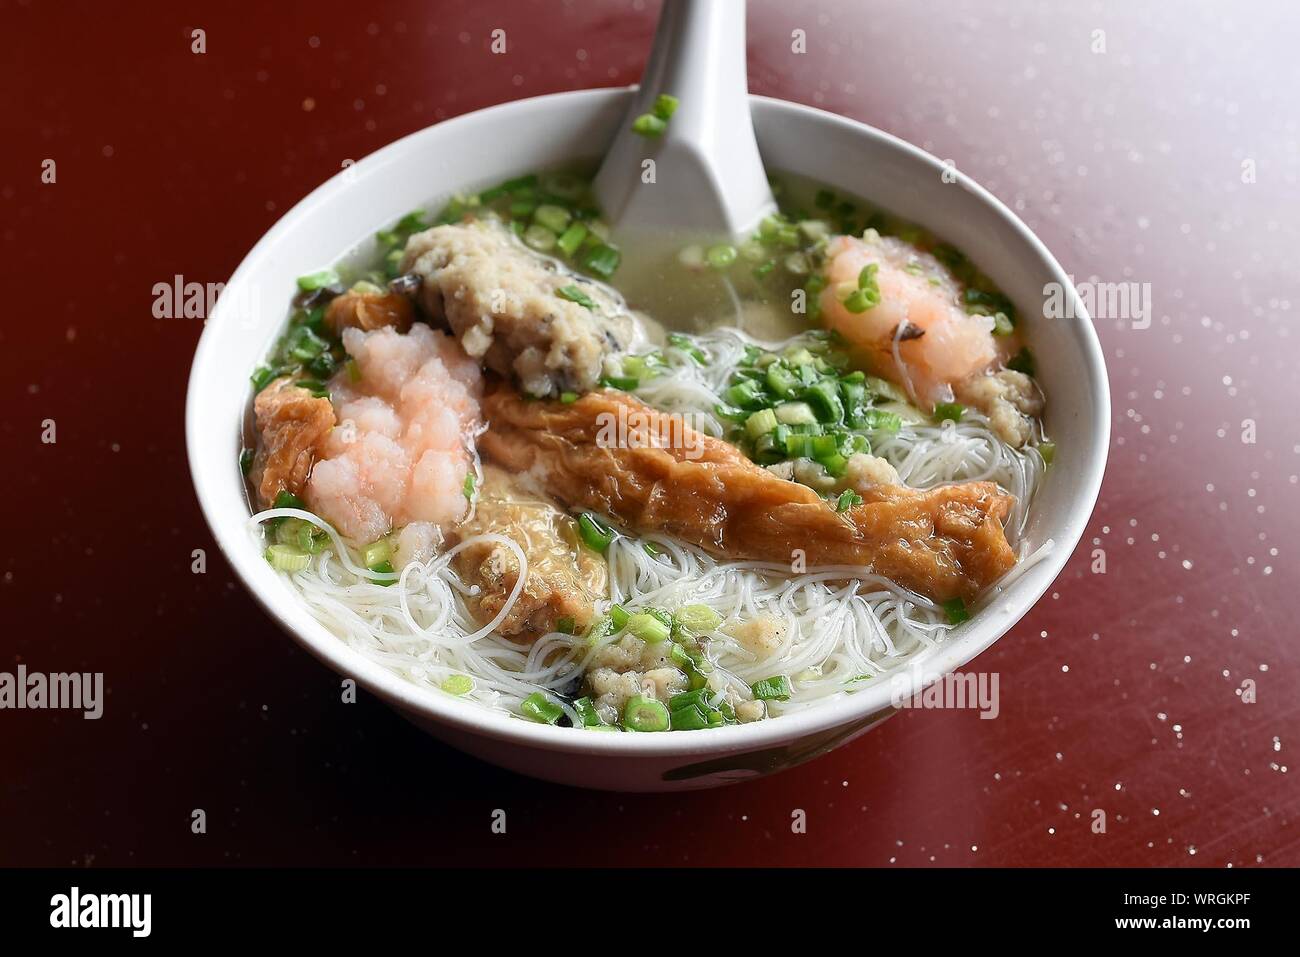 Close-up Of Yong Tau Foo In Bowl On Table Stock Photo